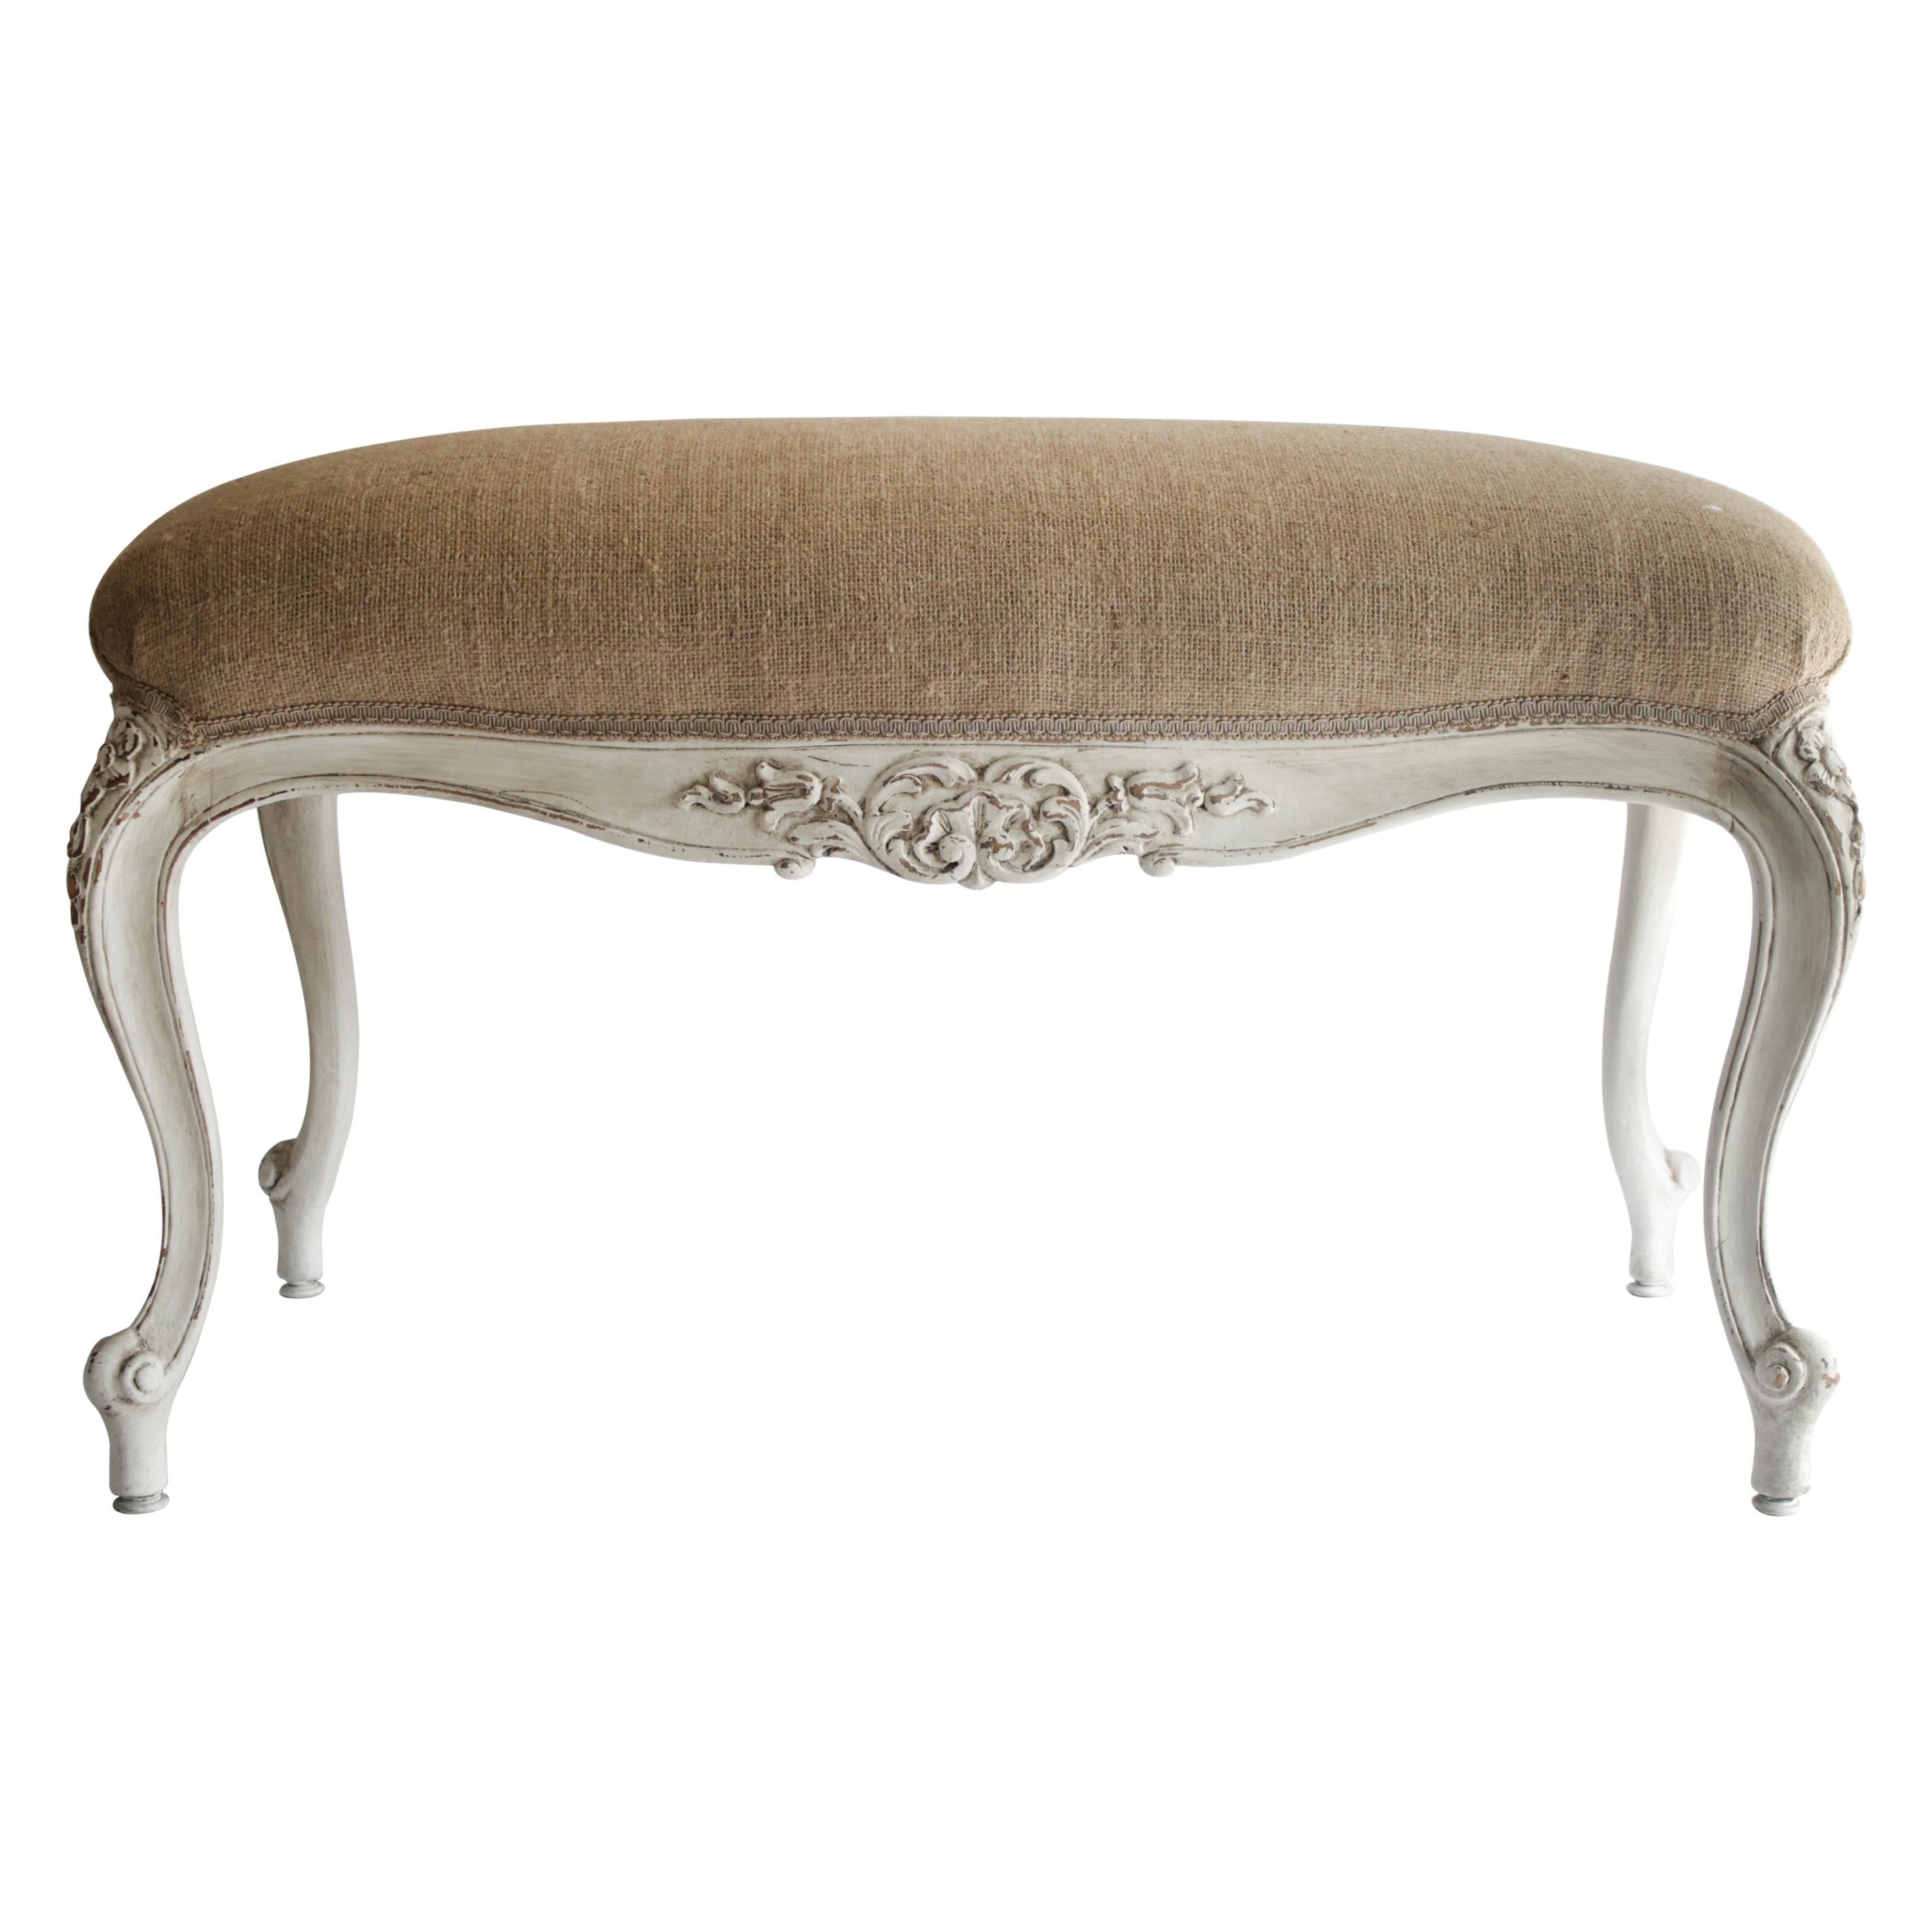 Vintage Louis XV Style Burlap Upholstered Bench